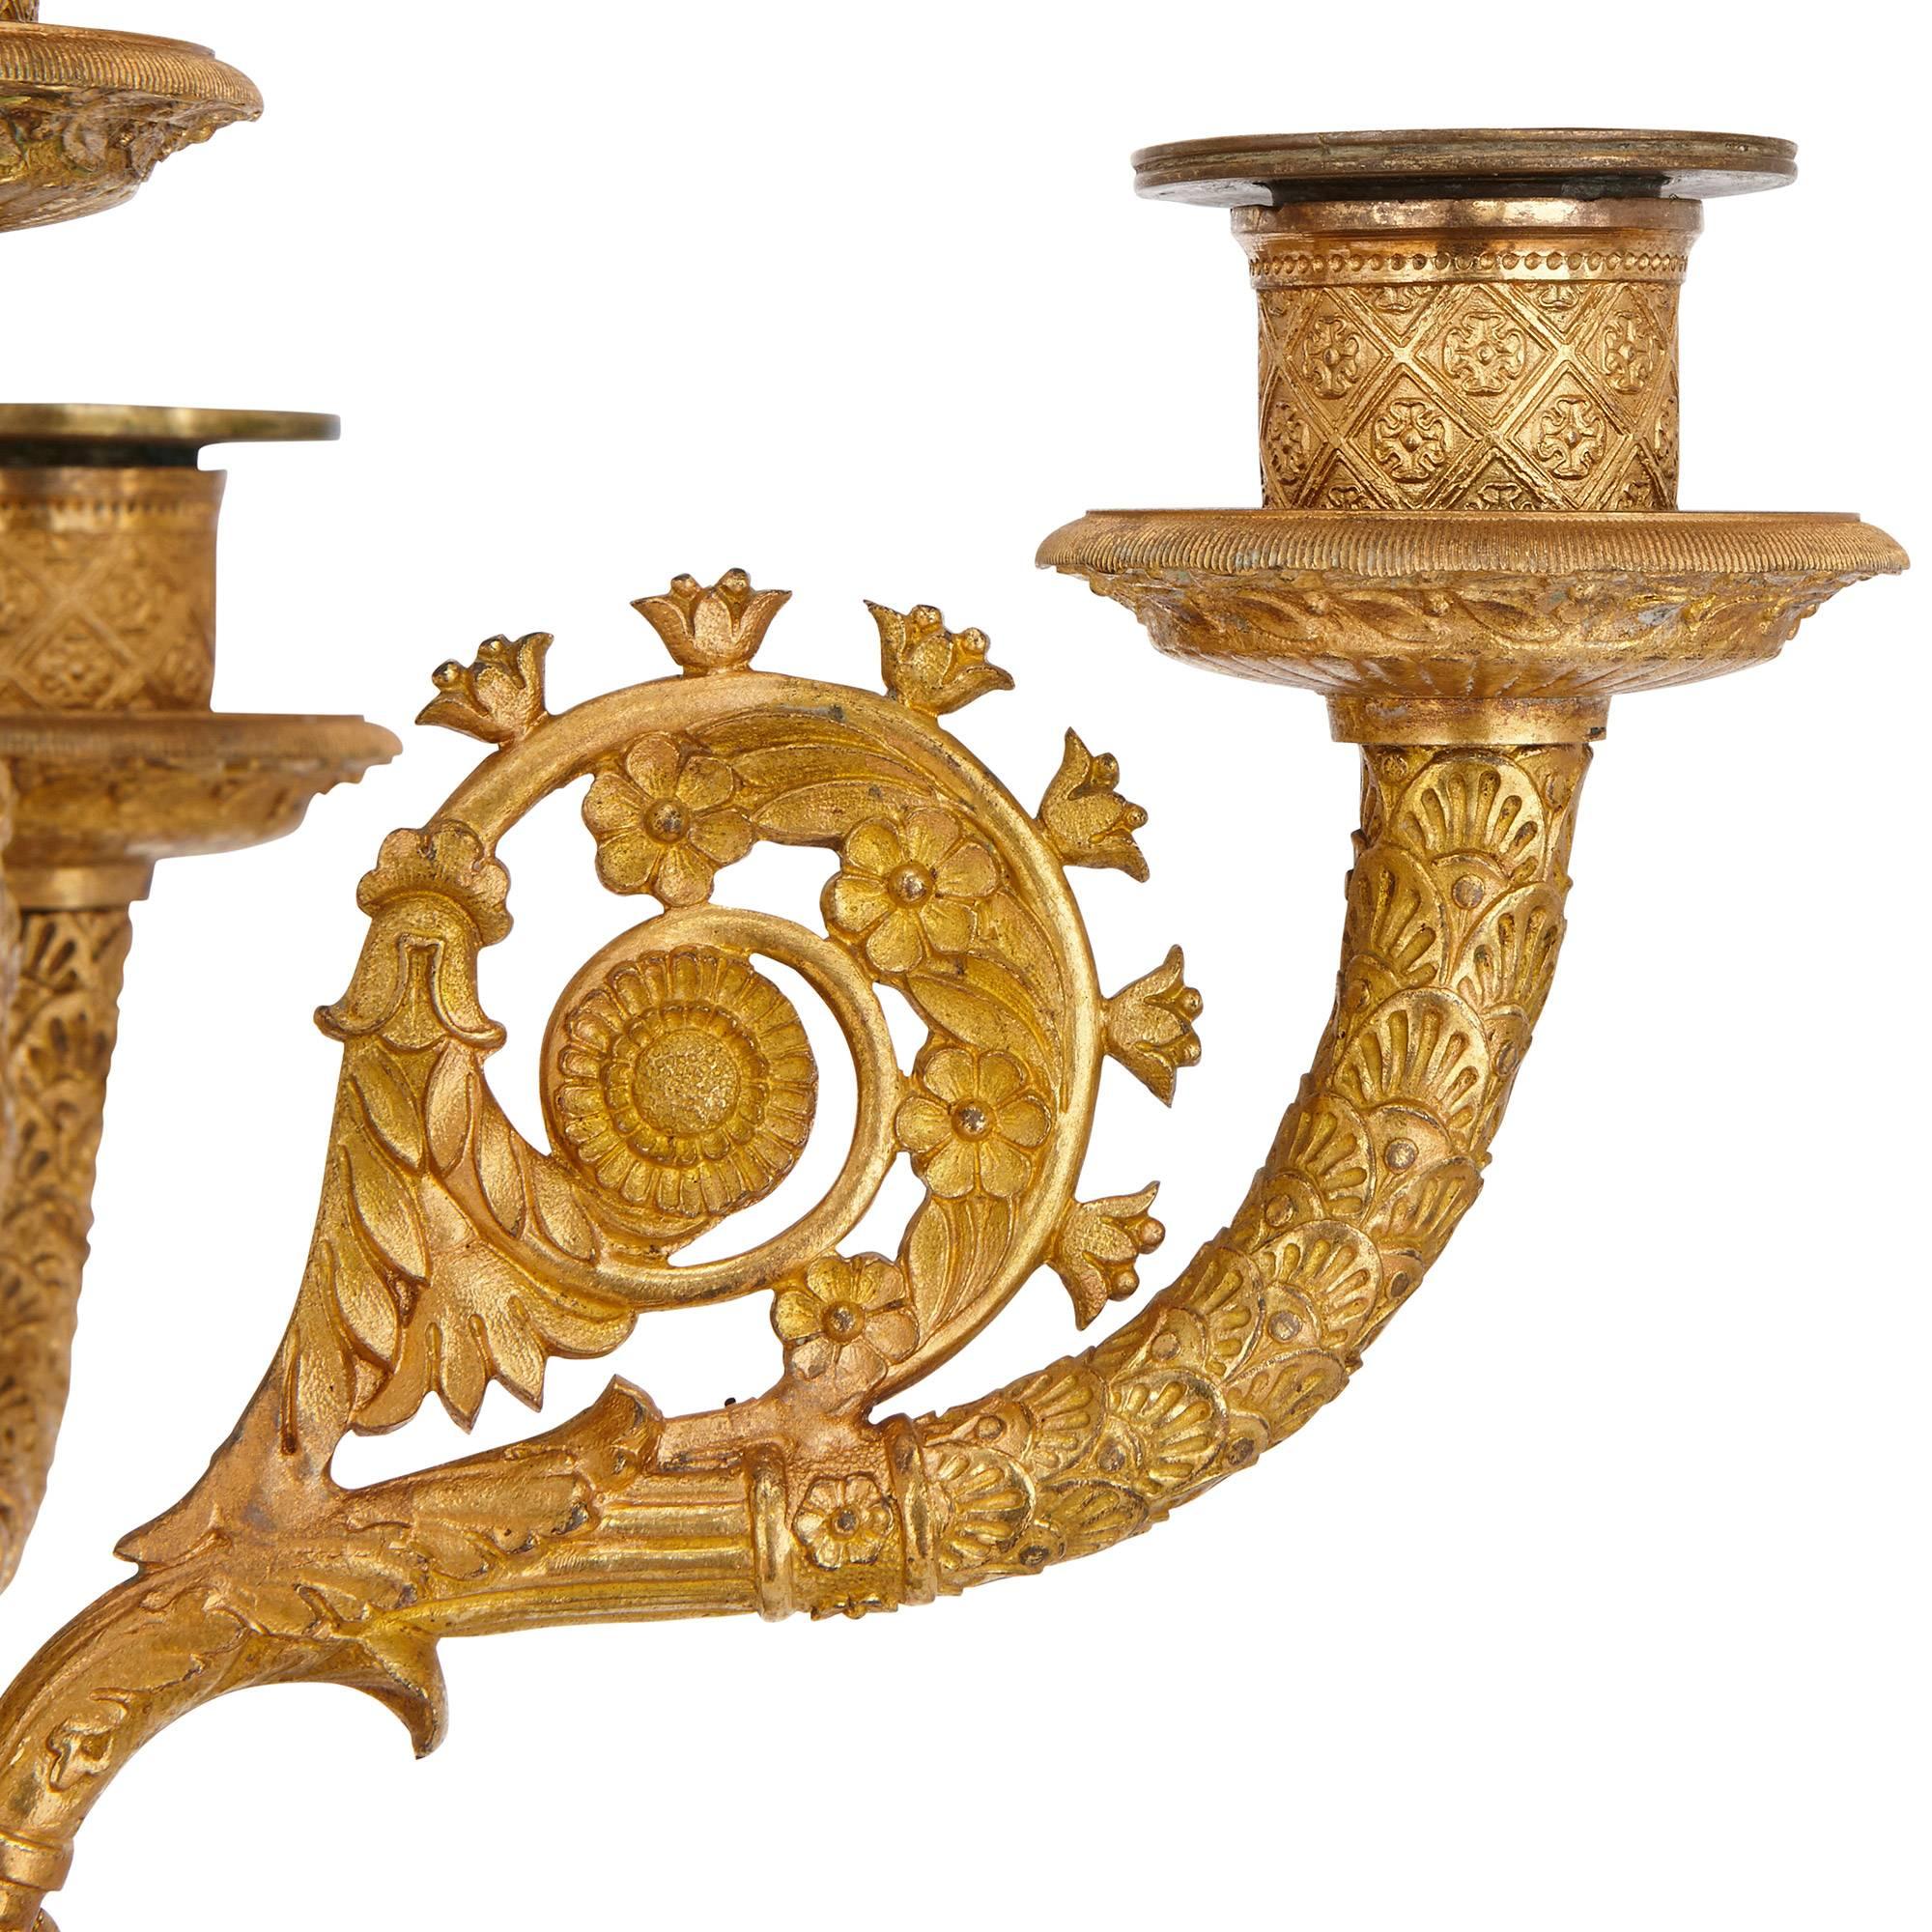 Pair of Antique French Empire Period Ormolu and Patinated Bronze Candelabra In Excellent Condition For Sale In London, GB